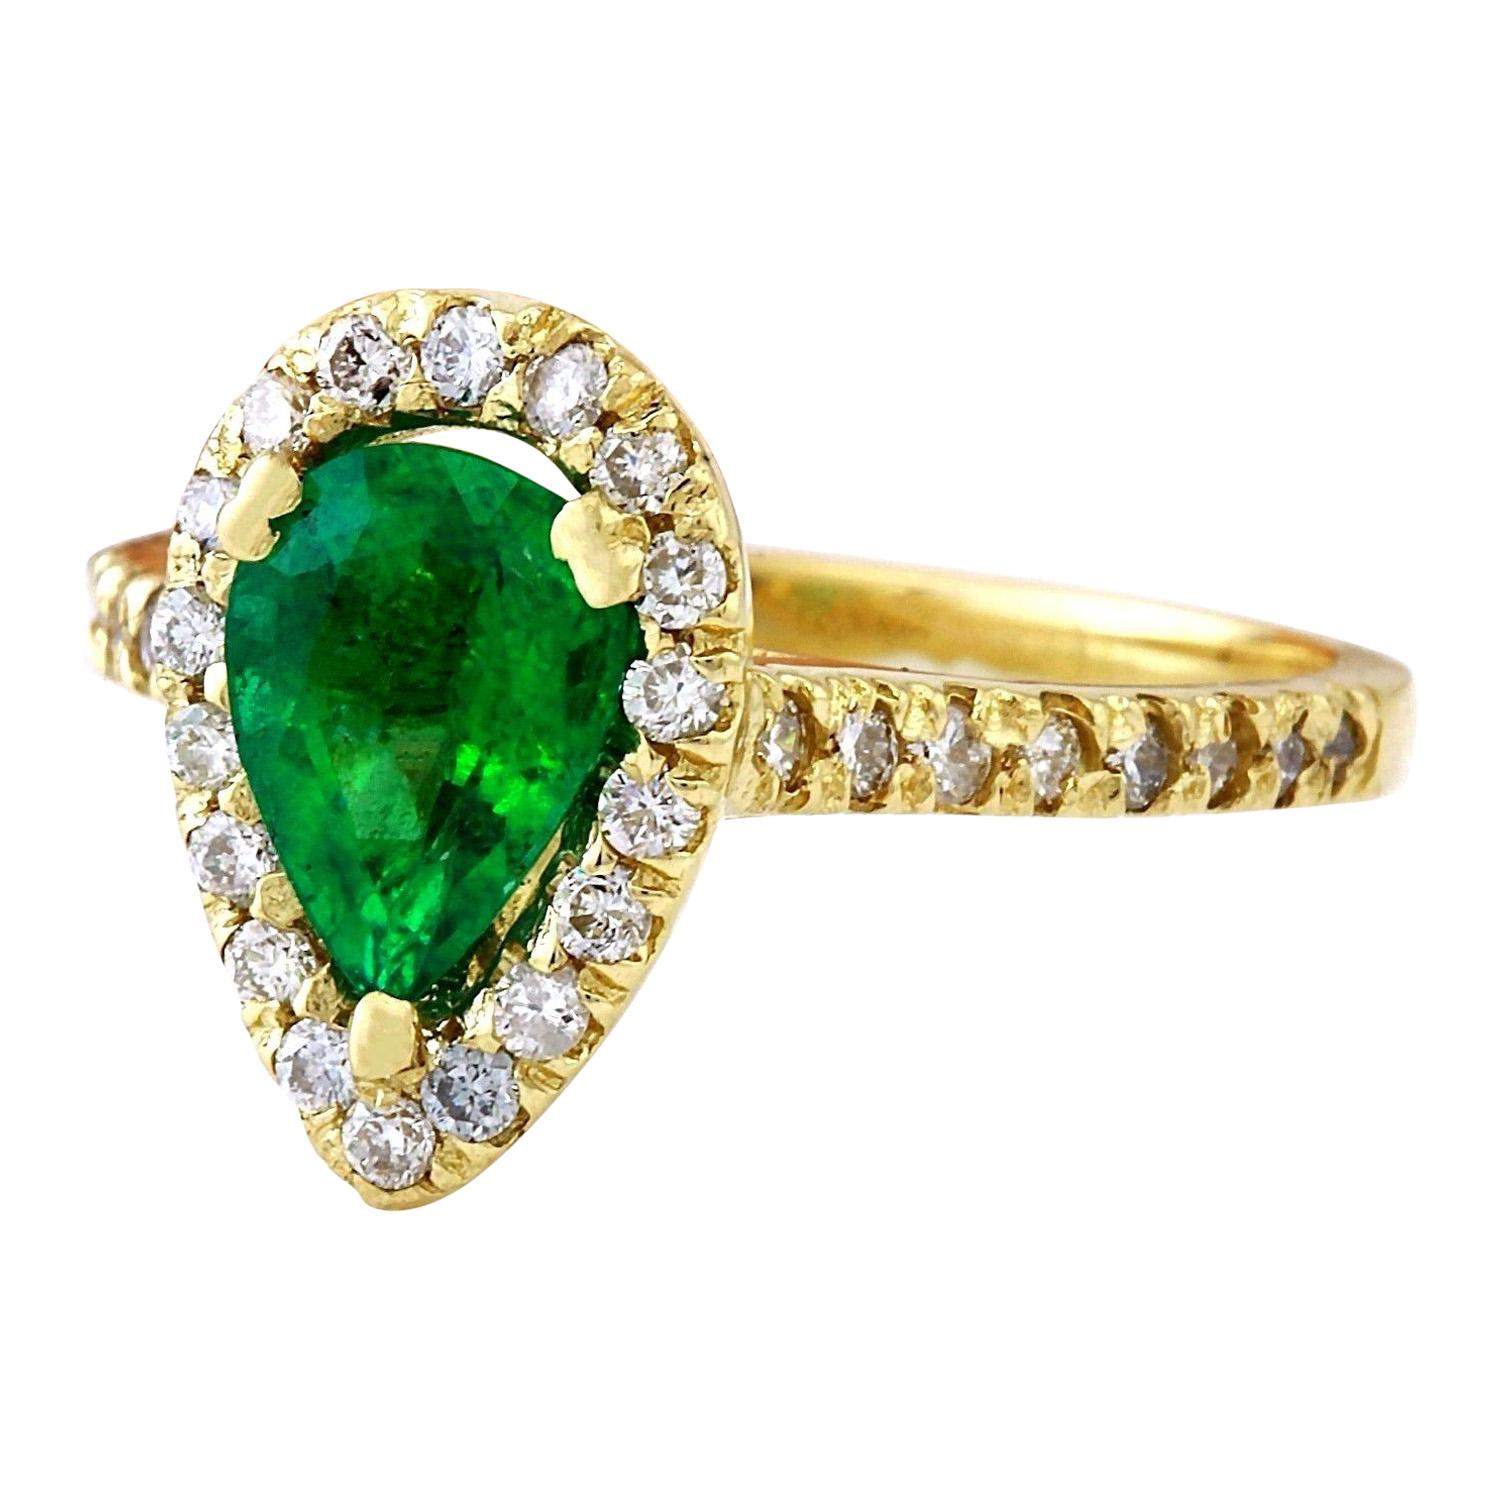 1.50 Carat Natural Emerald 14K Solid Yellow Gold Diamond Ring
 Item Type: Ring
 Item Style: Engagement
 Material: 18K Yellow Gold
 Mainstone: Emerald
 Stone Color: Green
 Stone Weight: 1.00 Carat
 Stone Shape: Pear
 Stone Quantity: 1
 Stone